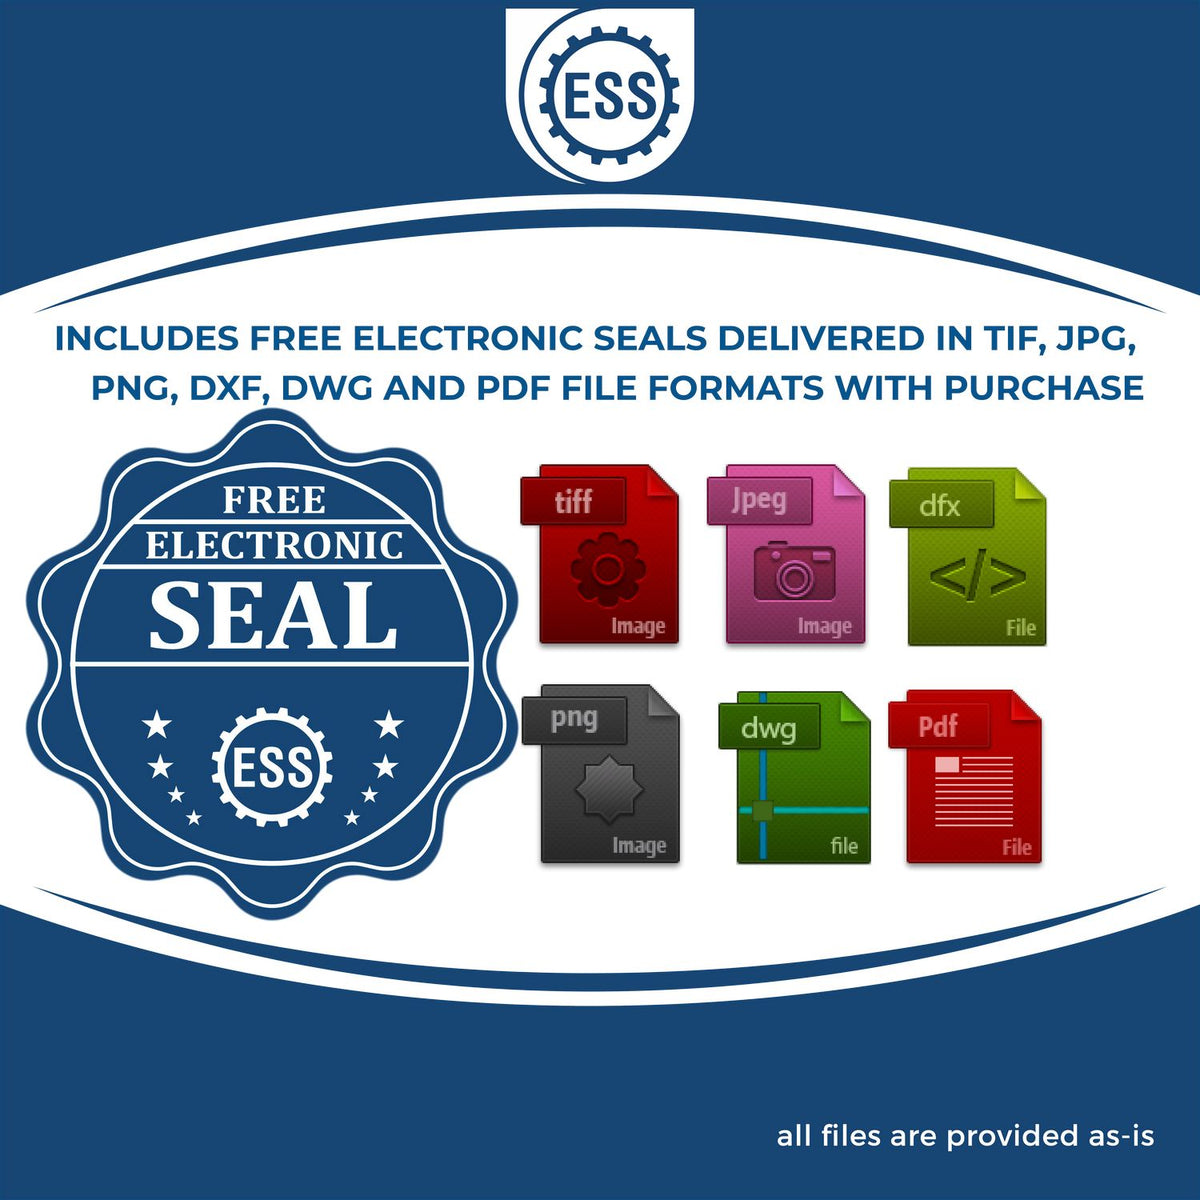 An infographic for the free electronic seal for the Hybrid Pennsylvania Landscape Architect Seal illustrating the different file type icons such as DXF, DWG, TIF, JPG and PNG.